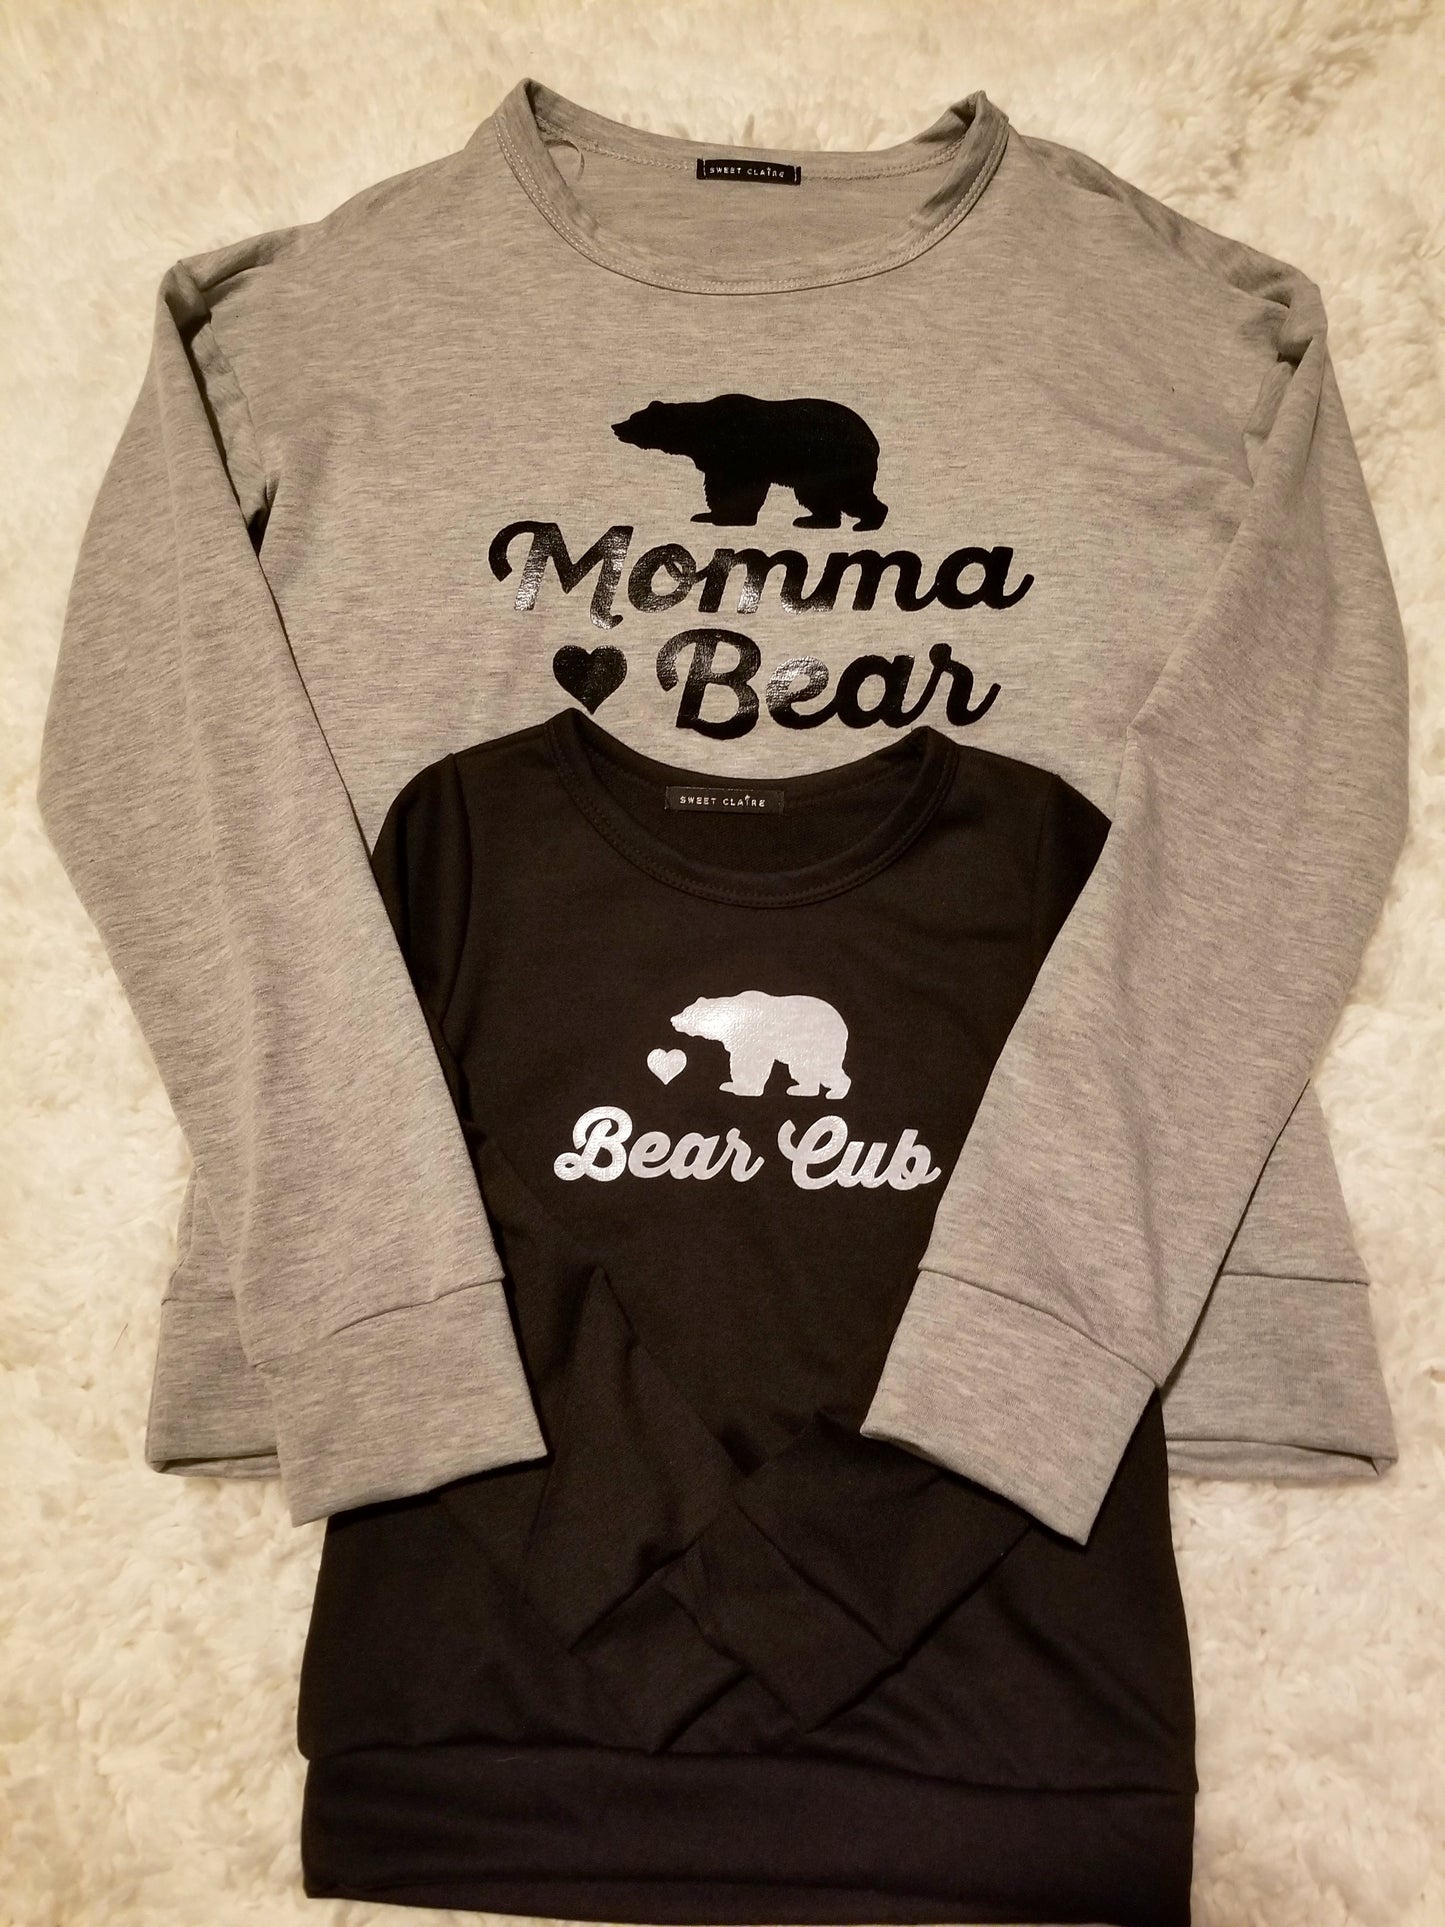 Bear Cub Top - Summer at Payton's Online Boutique